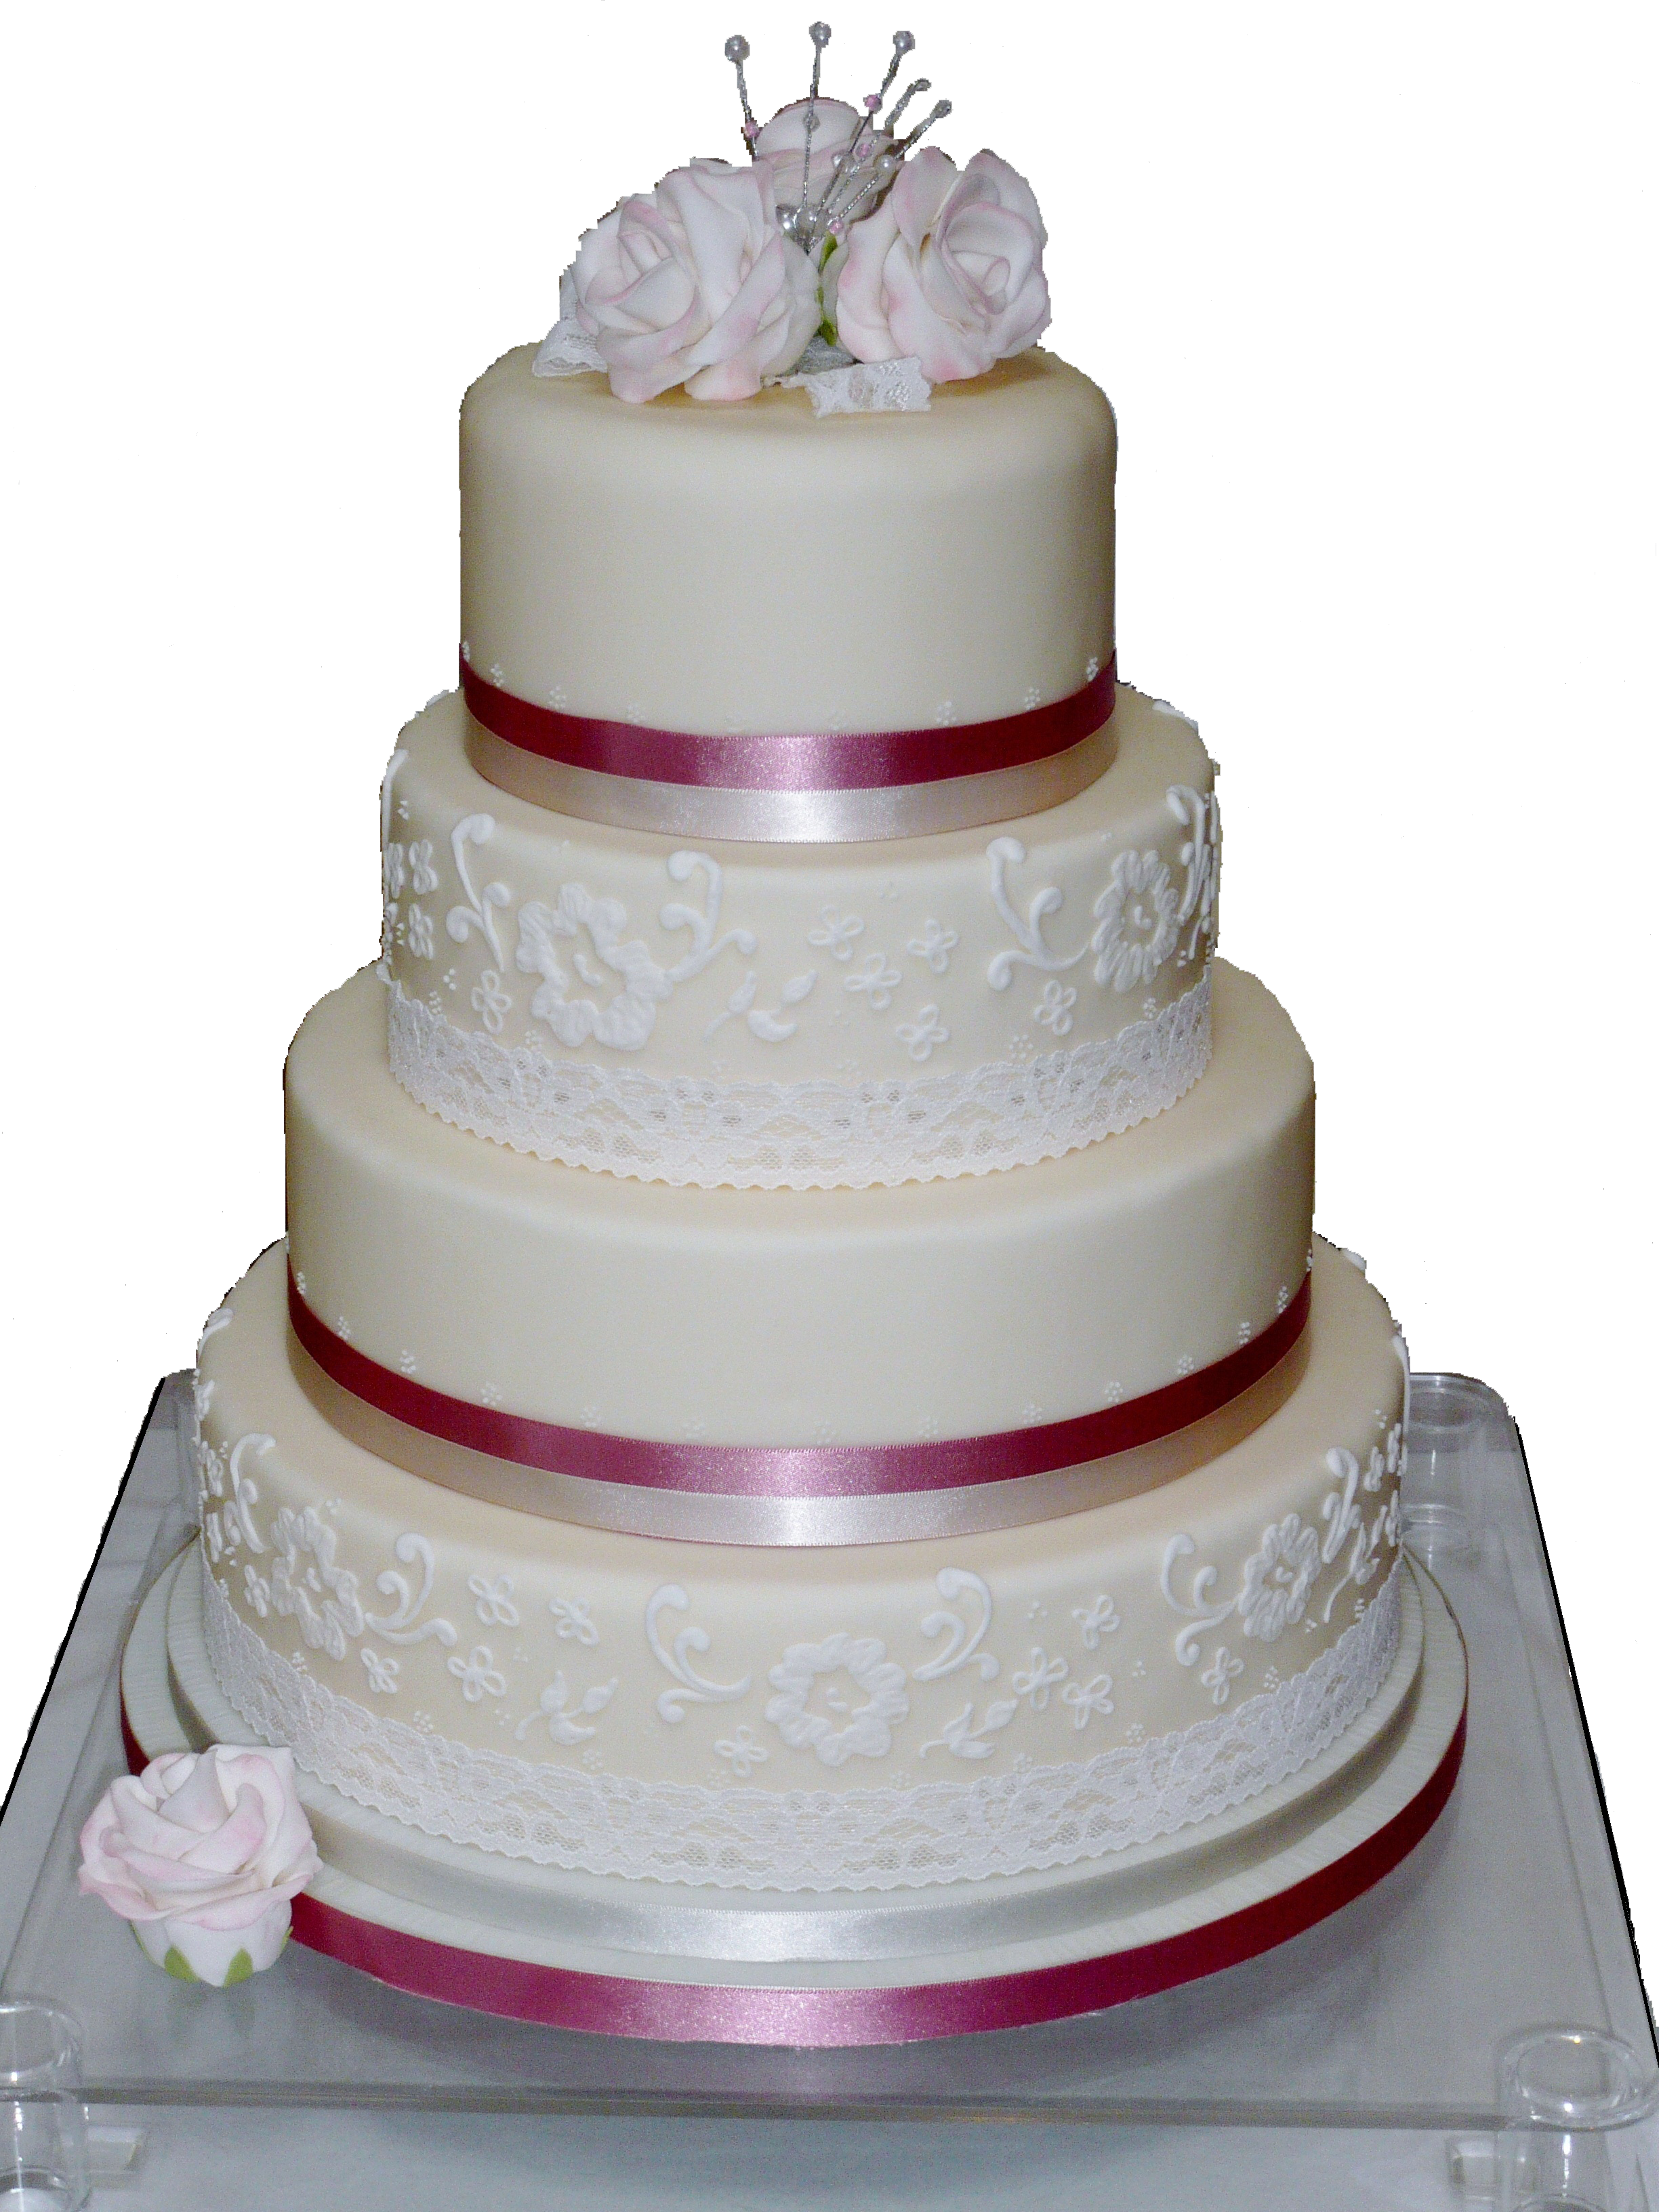 Awesome Multi Layer Wedding Cake, Wedding Cake, Cake, Wedding PNG  Transparent Image and Clipart for Free Download